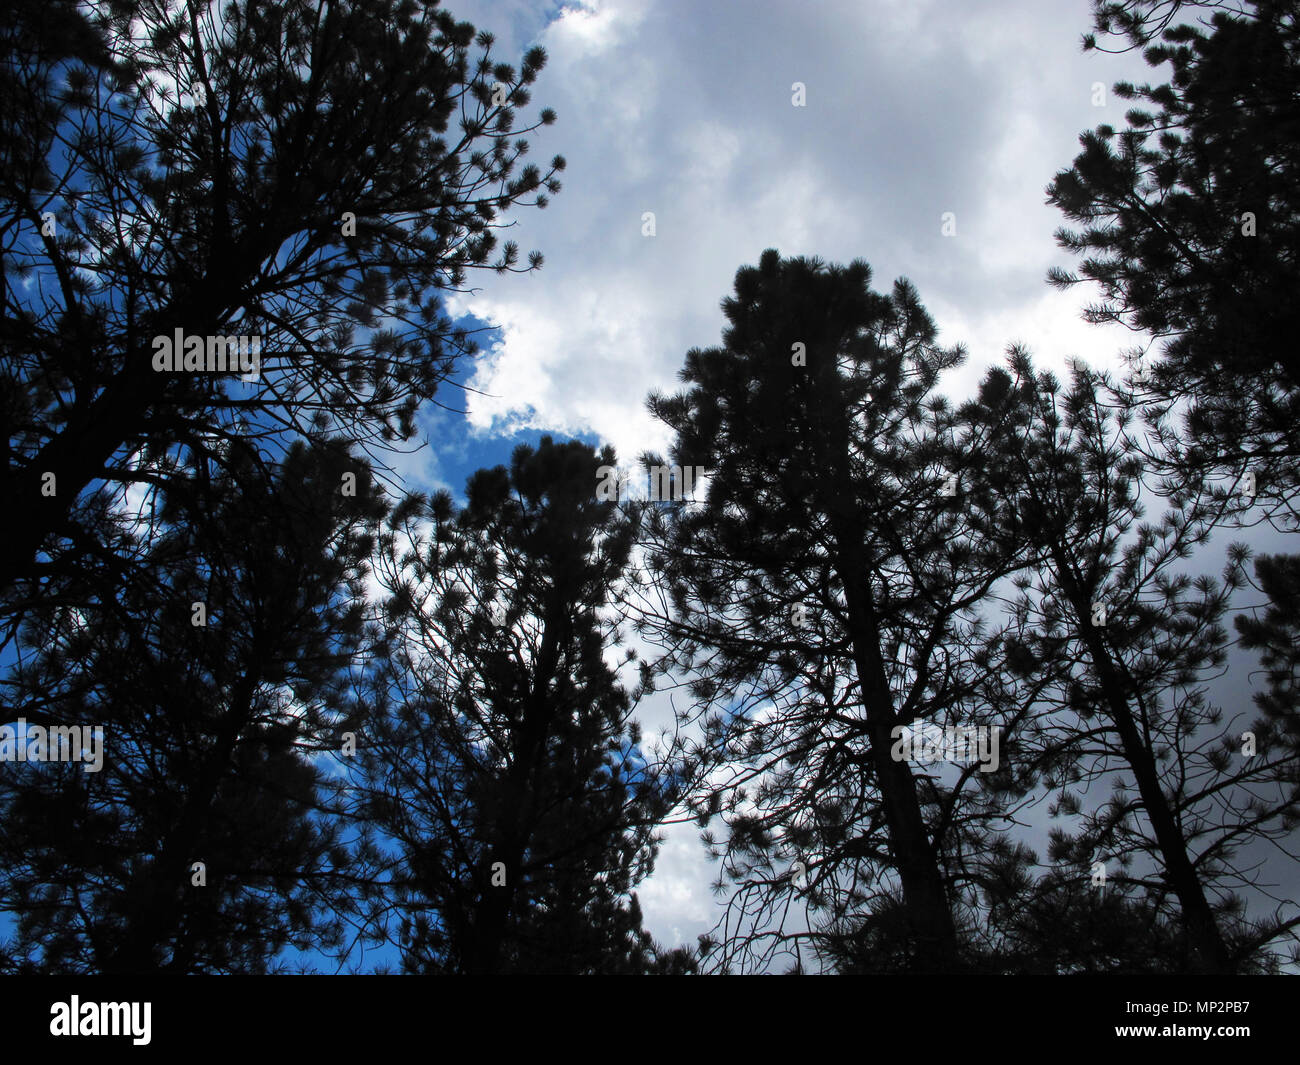 Ponderosa Pine Trees Patiently Awaiting the Possible Rain from the Developing Gray Clouds Stock Photo